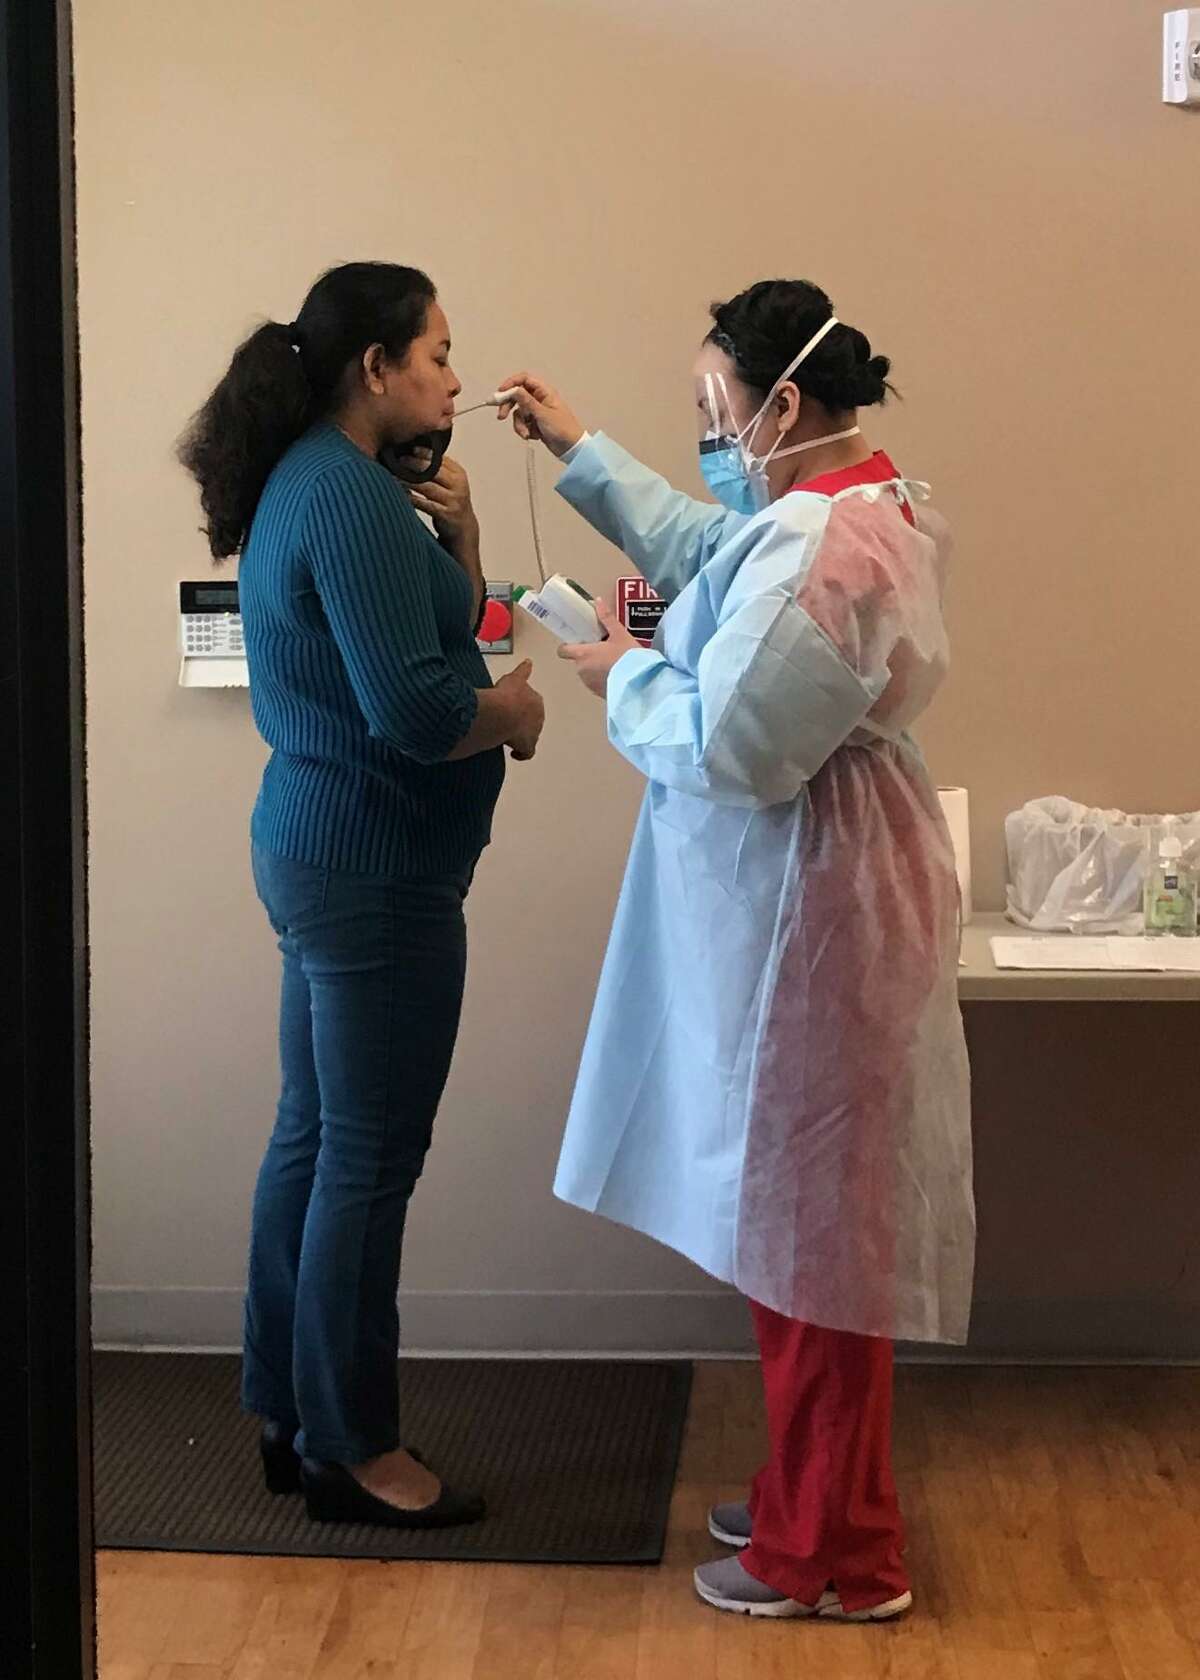 TOMAGWA HealthCare Ministries celebrated Nurses Week, May 6-12, by decorating their locations, passing out treats, fun tumblers, decorated cookies, and sharing words of thanks for the blessing that their nurses are. Pictured is MA Helen Saenz-Camacho taking temperature.